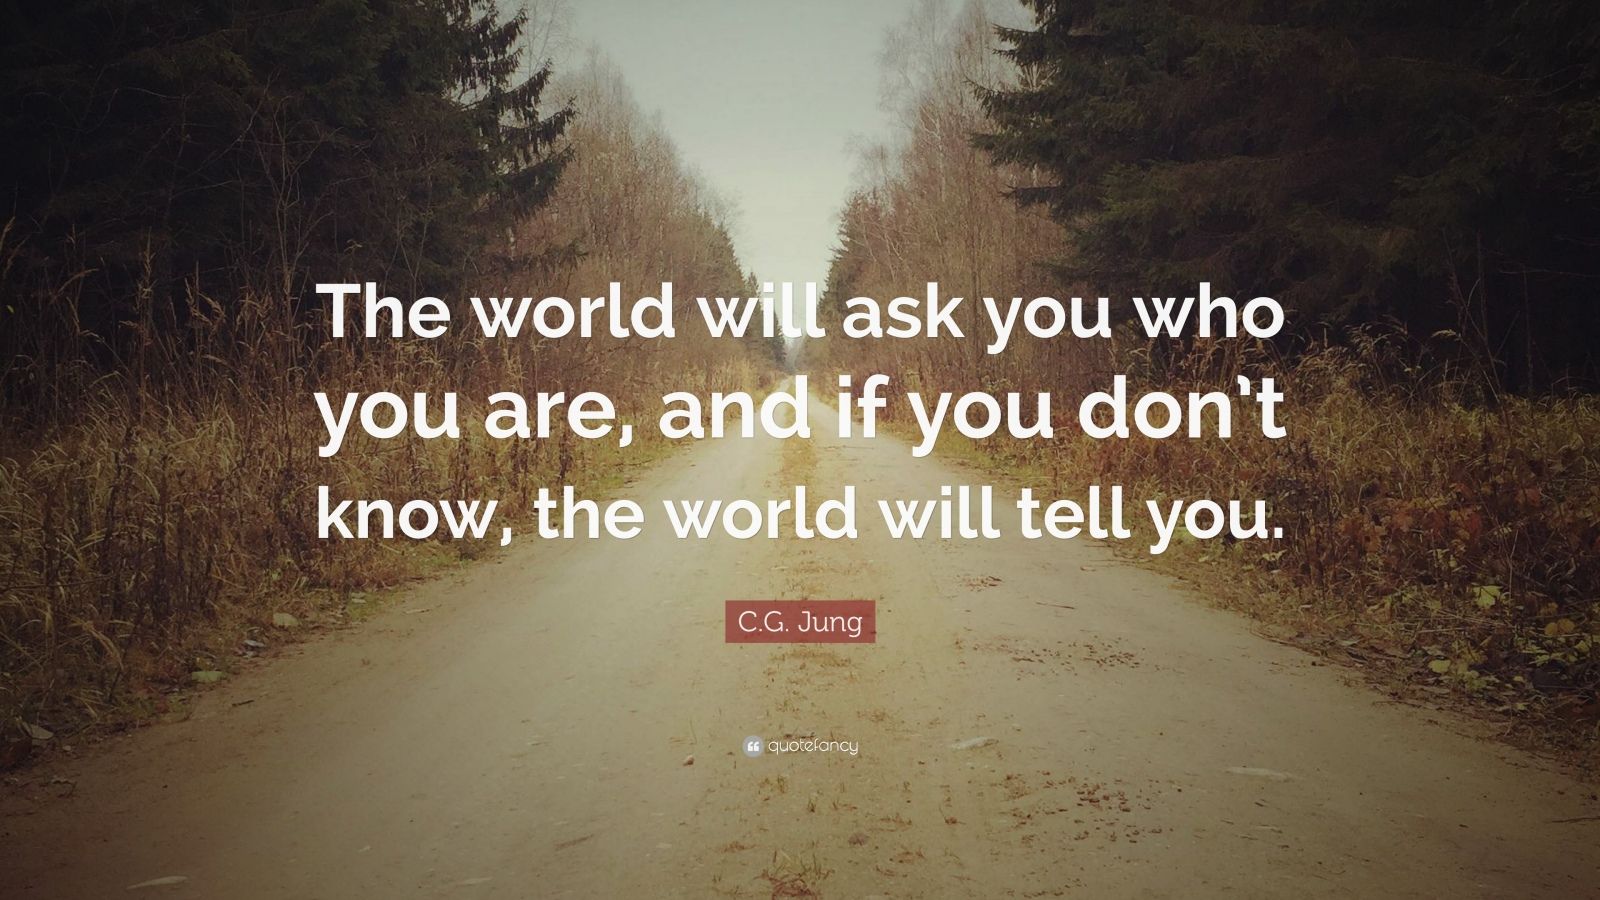 C.G. Jung Quote “The world will ask you who you are, and